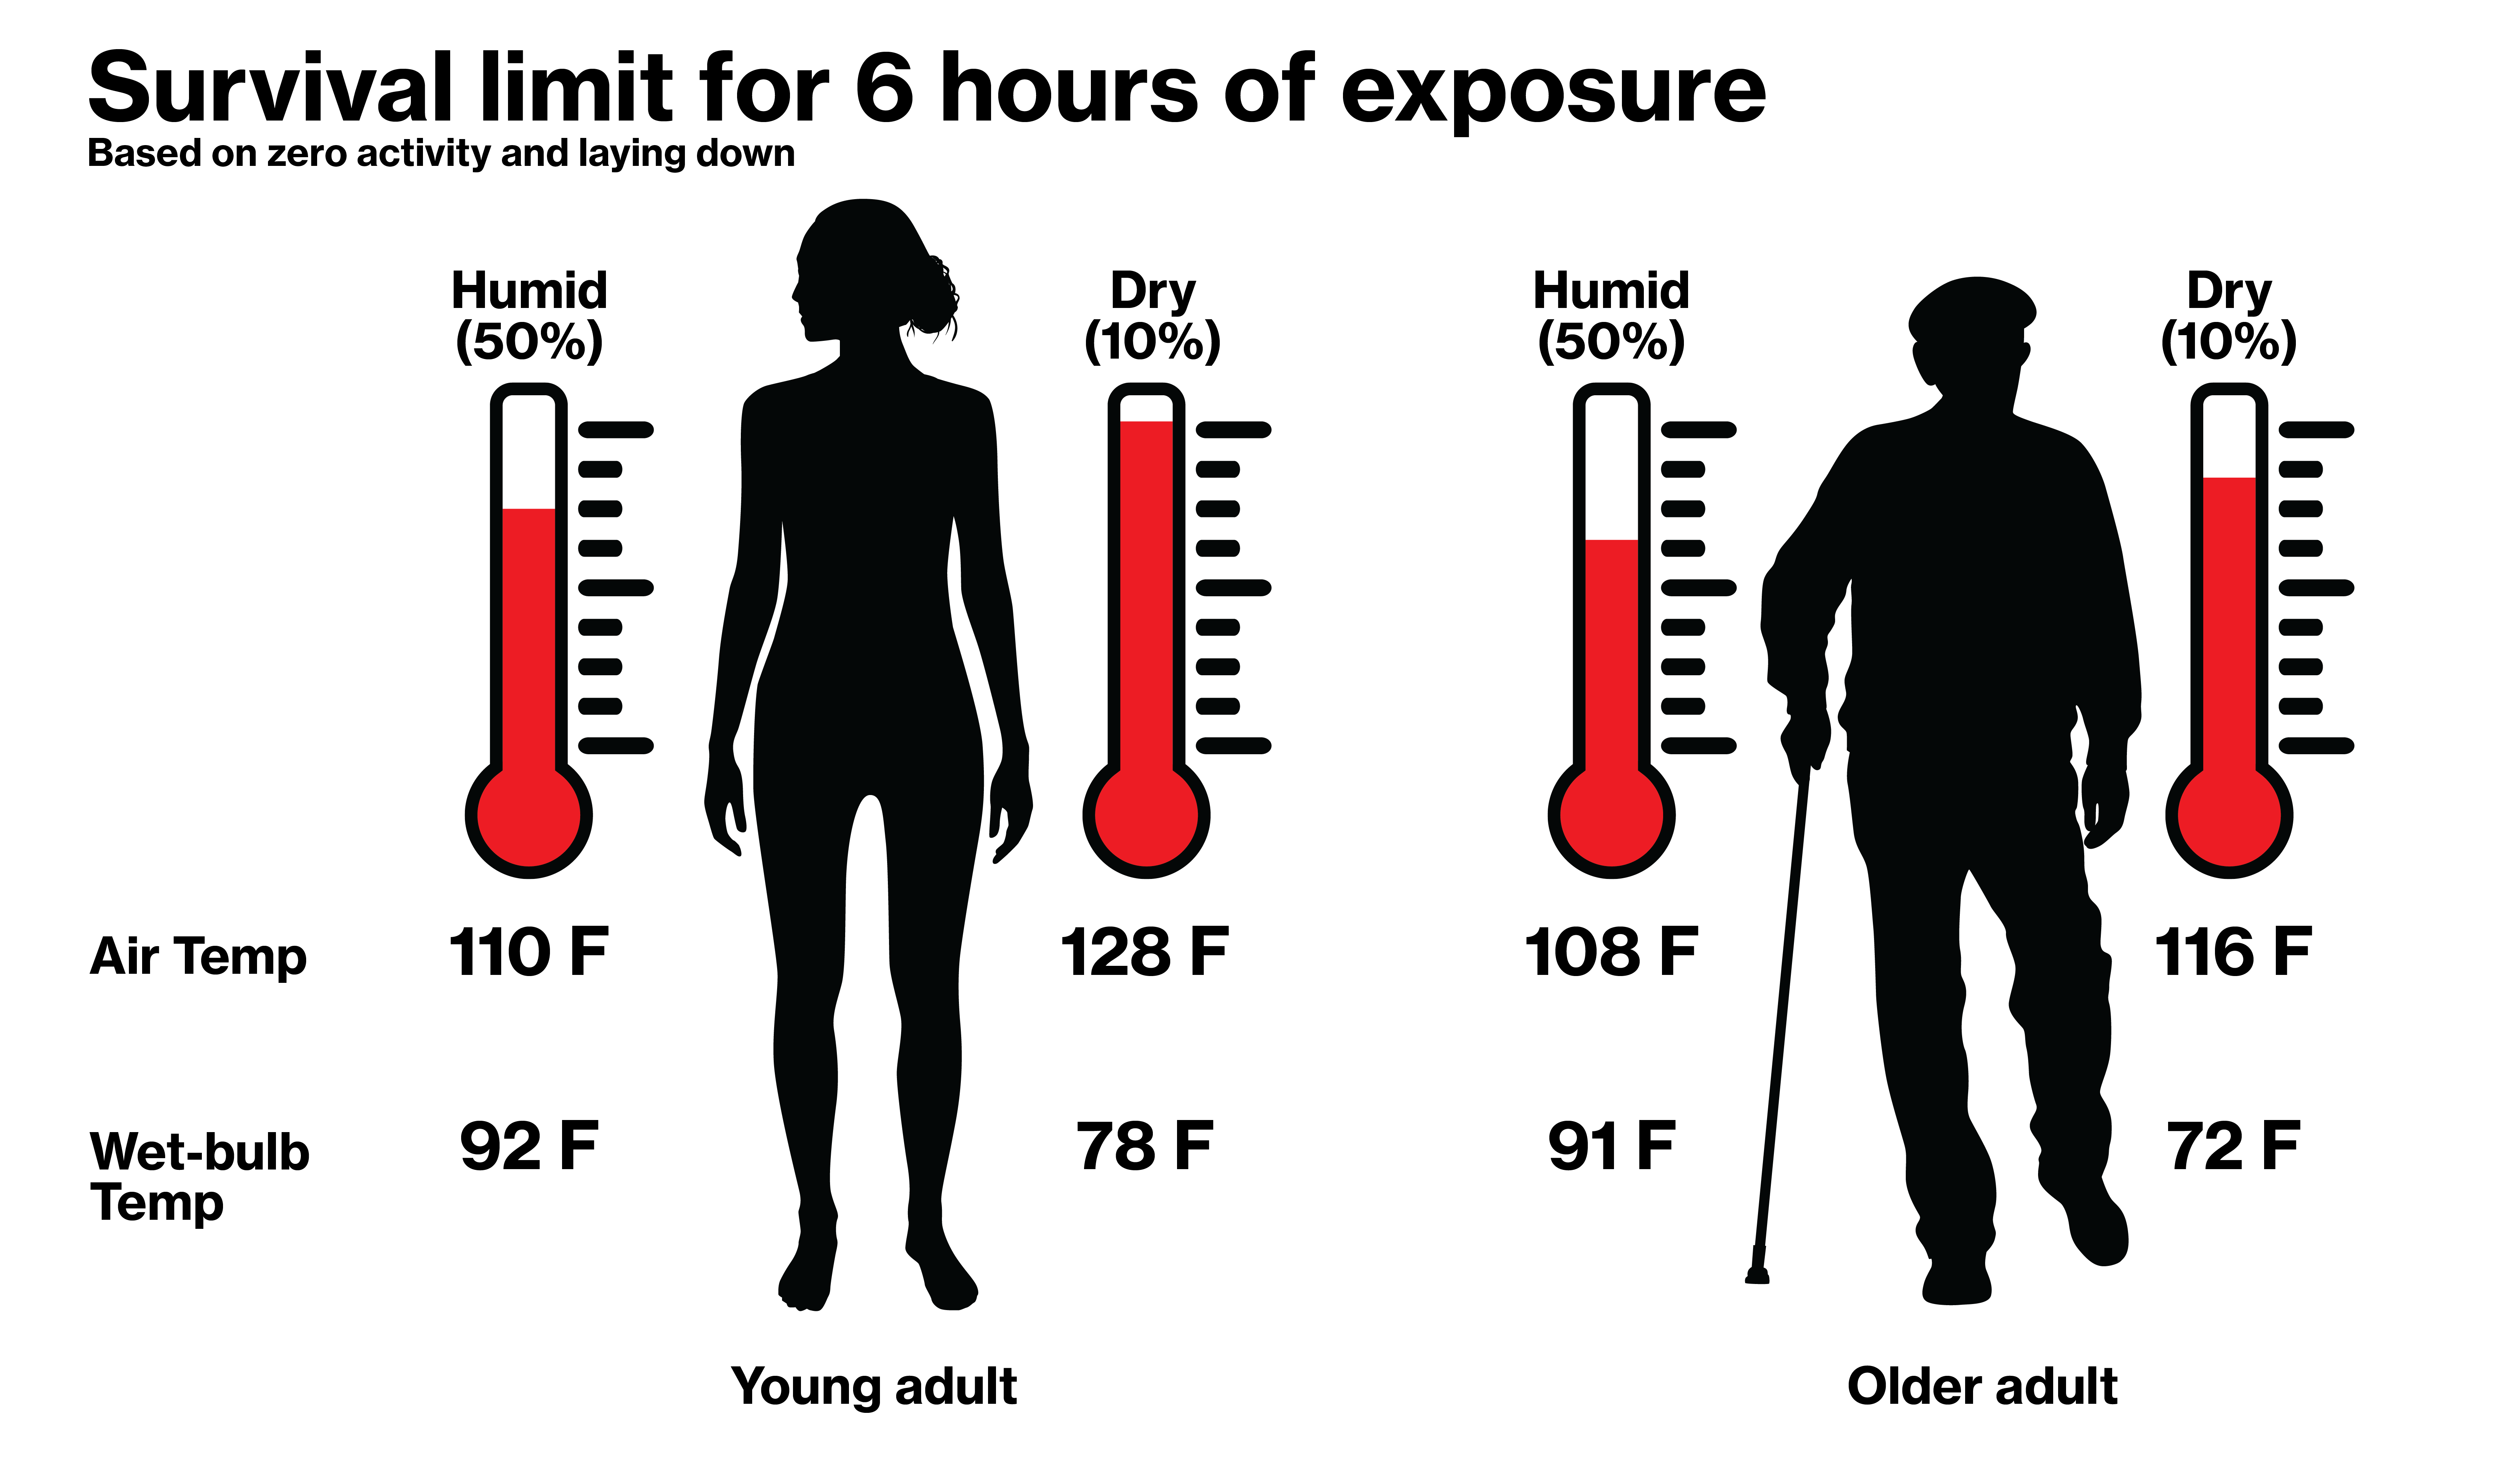 Infographic shows difference between young and older adults exposed to different temperatures and wet-bulb temperatures. 